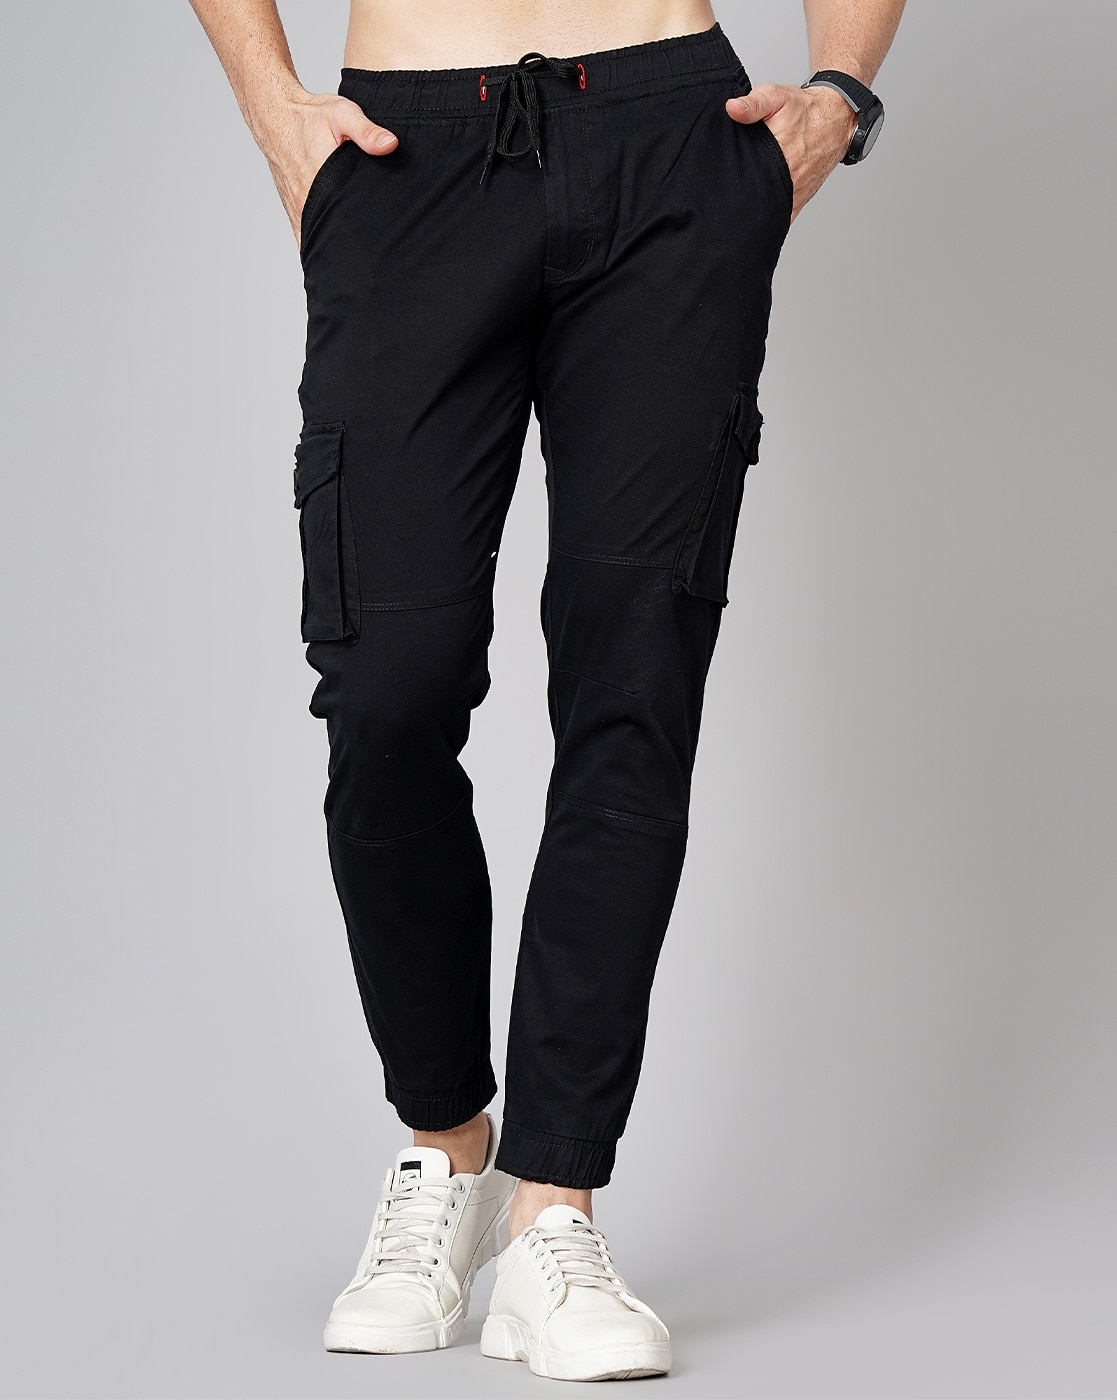 Buy ONLY Black Womens 6 Pocket Solid Joggers Pants  Shoppers Stop